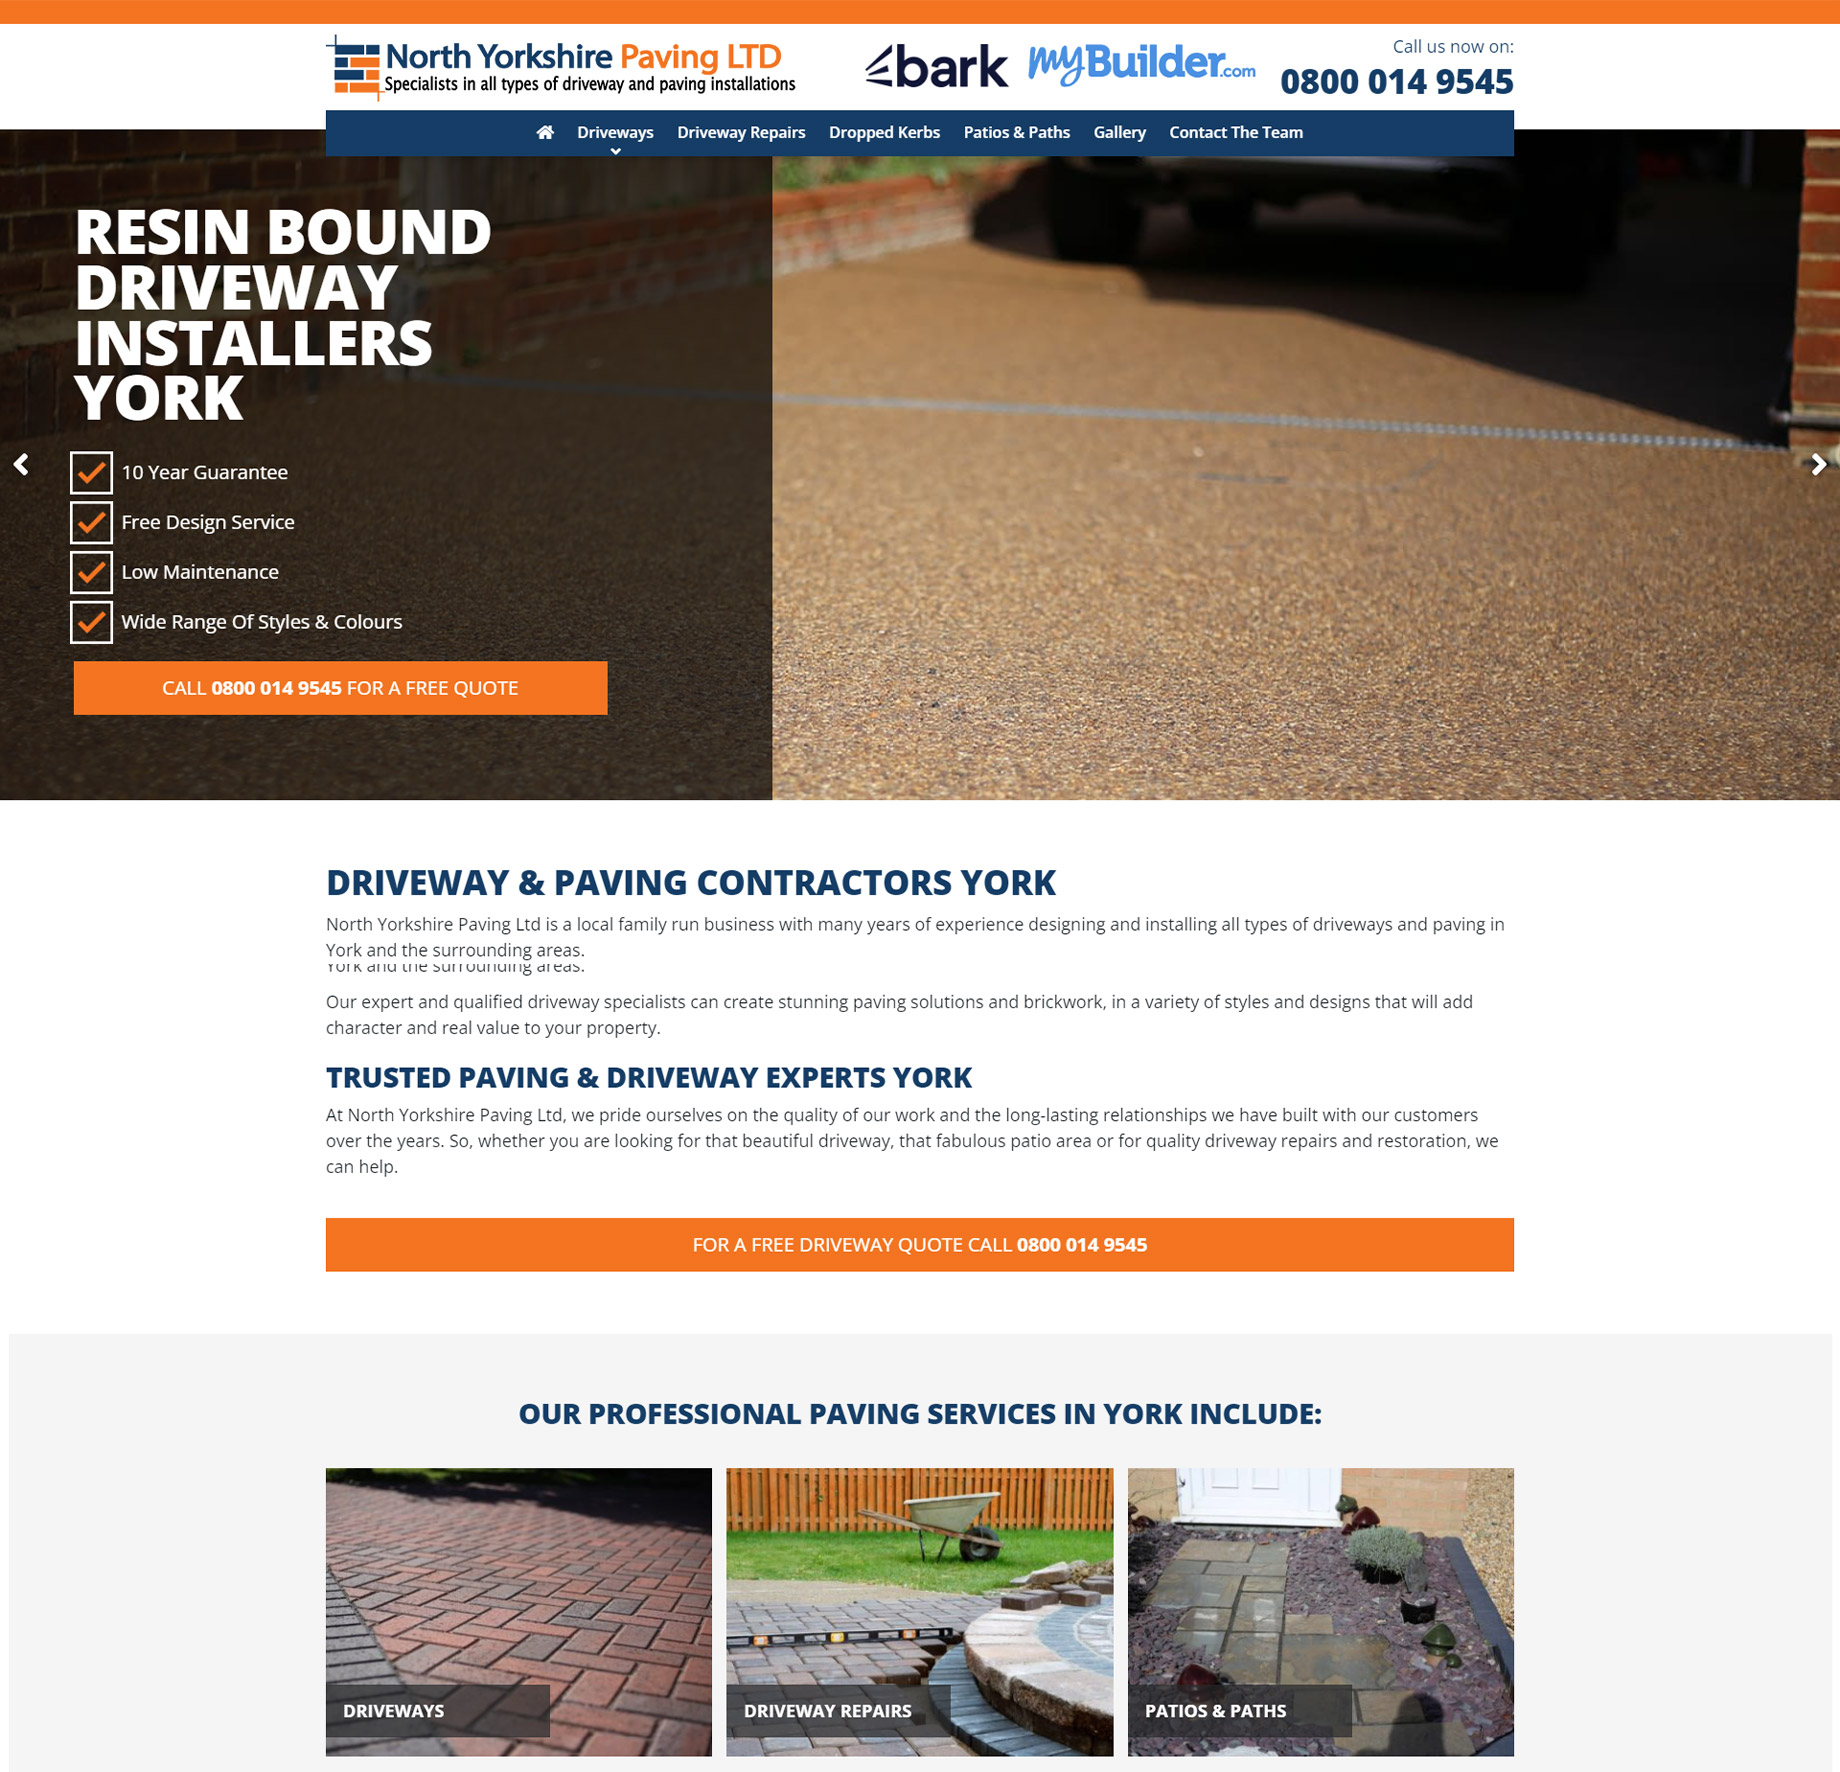 Driveways and patios contractor website designers near [city]